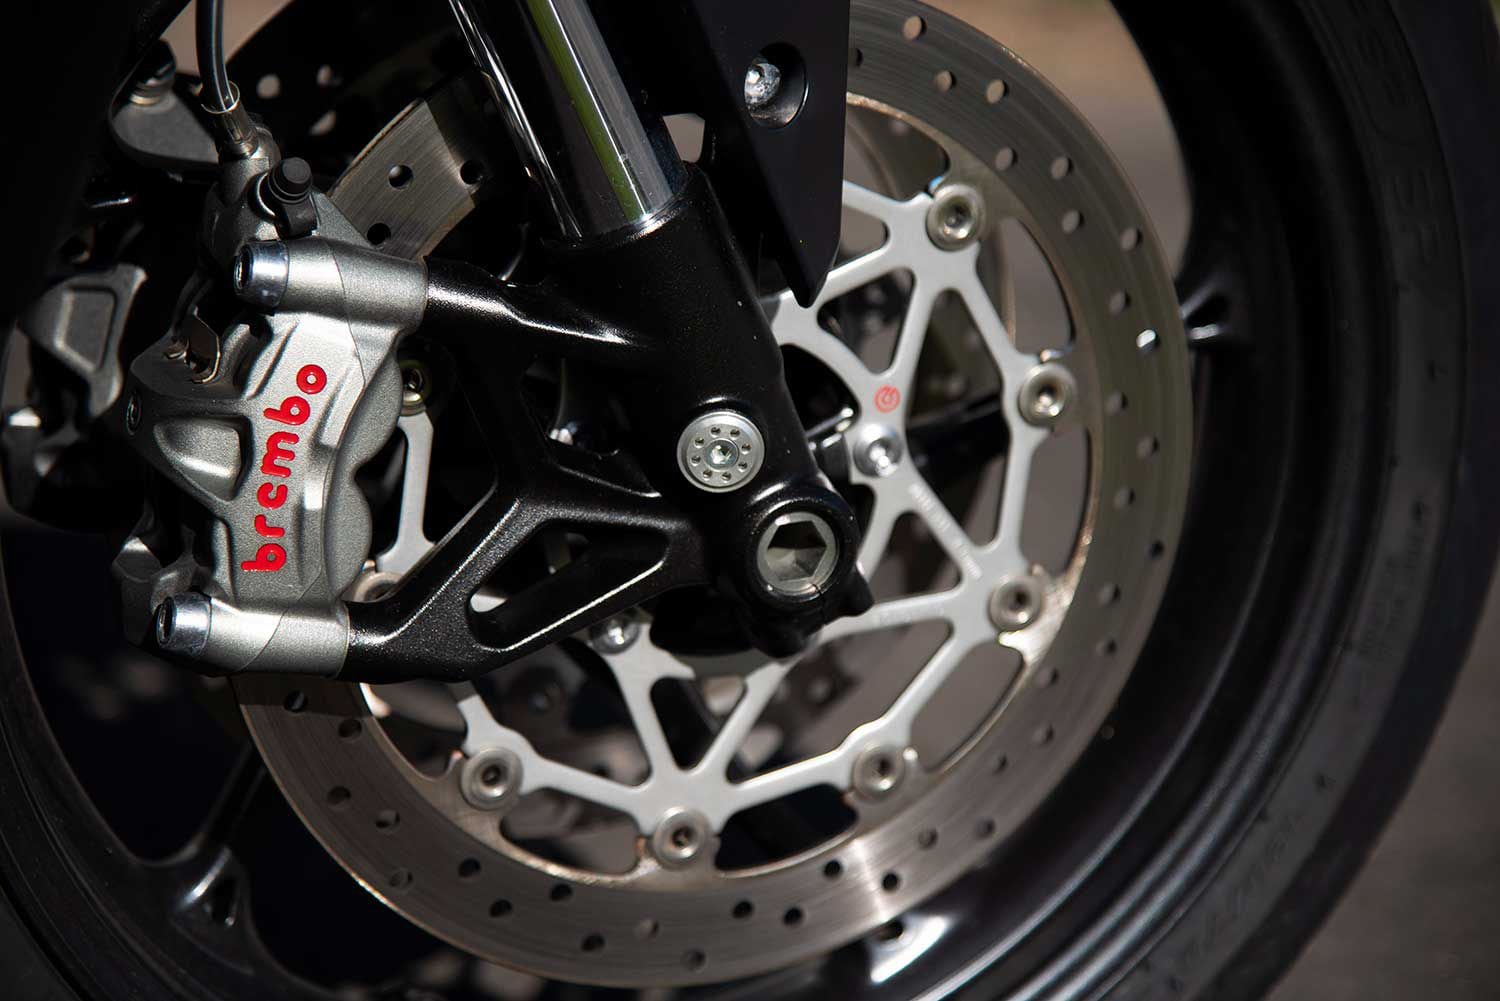 Twin 310mm Brembo M50s produce excellent brake feel, and unlike the R, the RS’s ABS can be disabled.